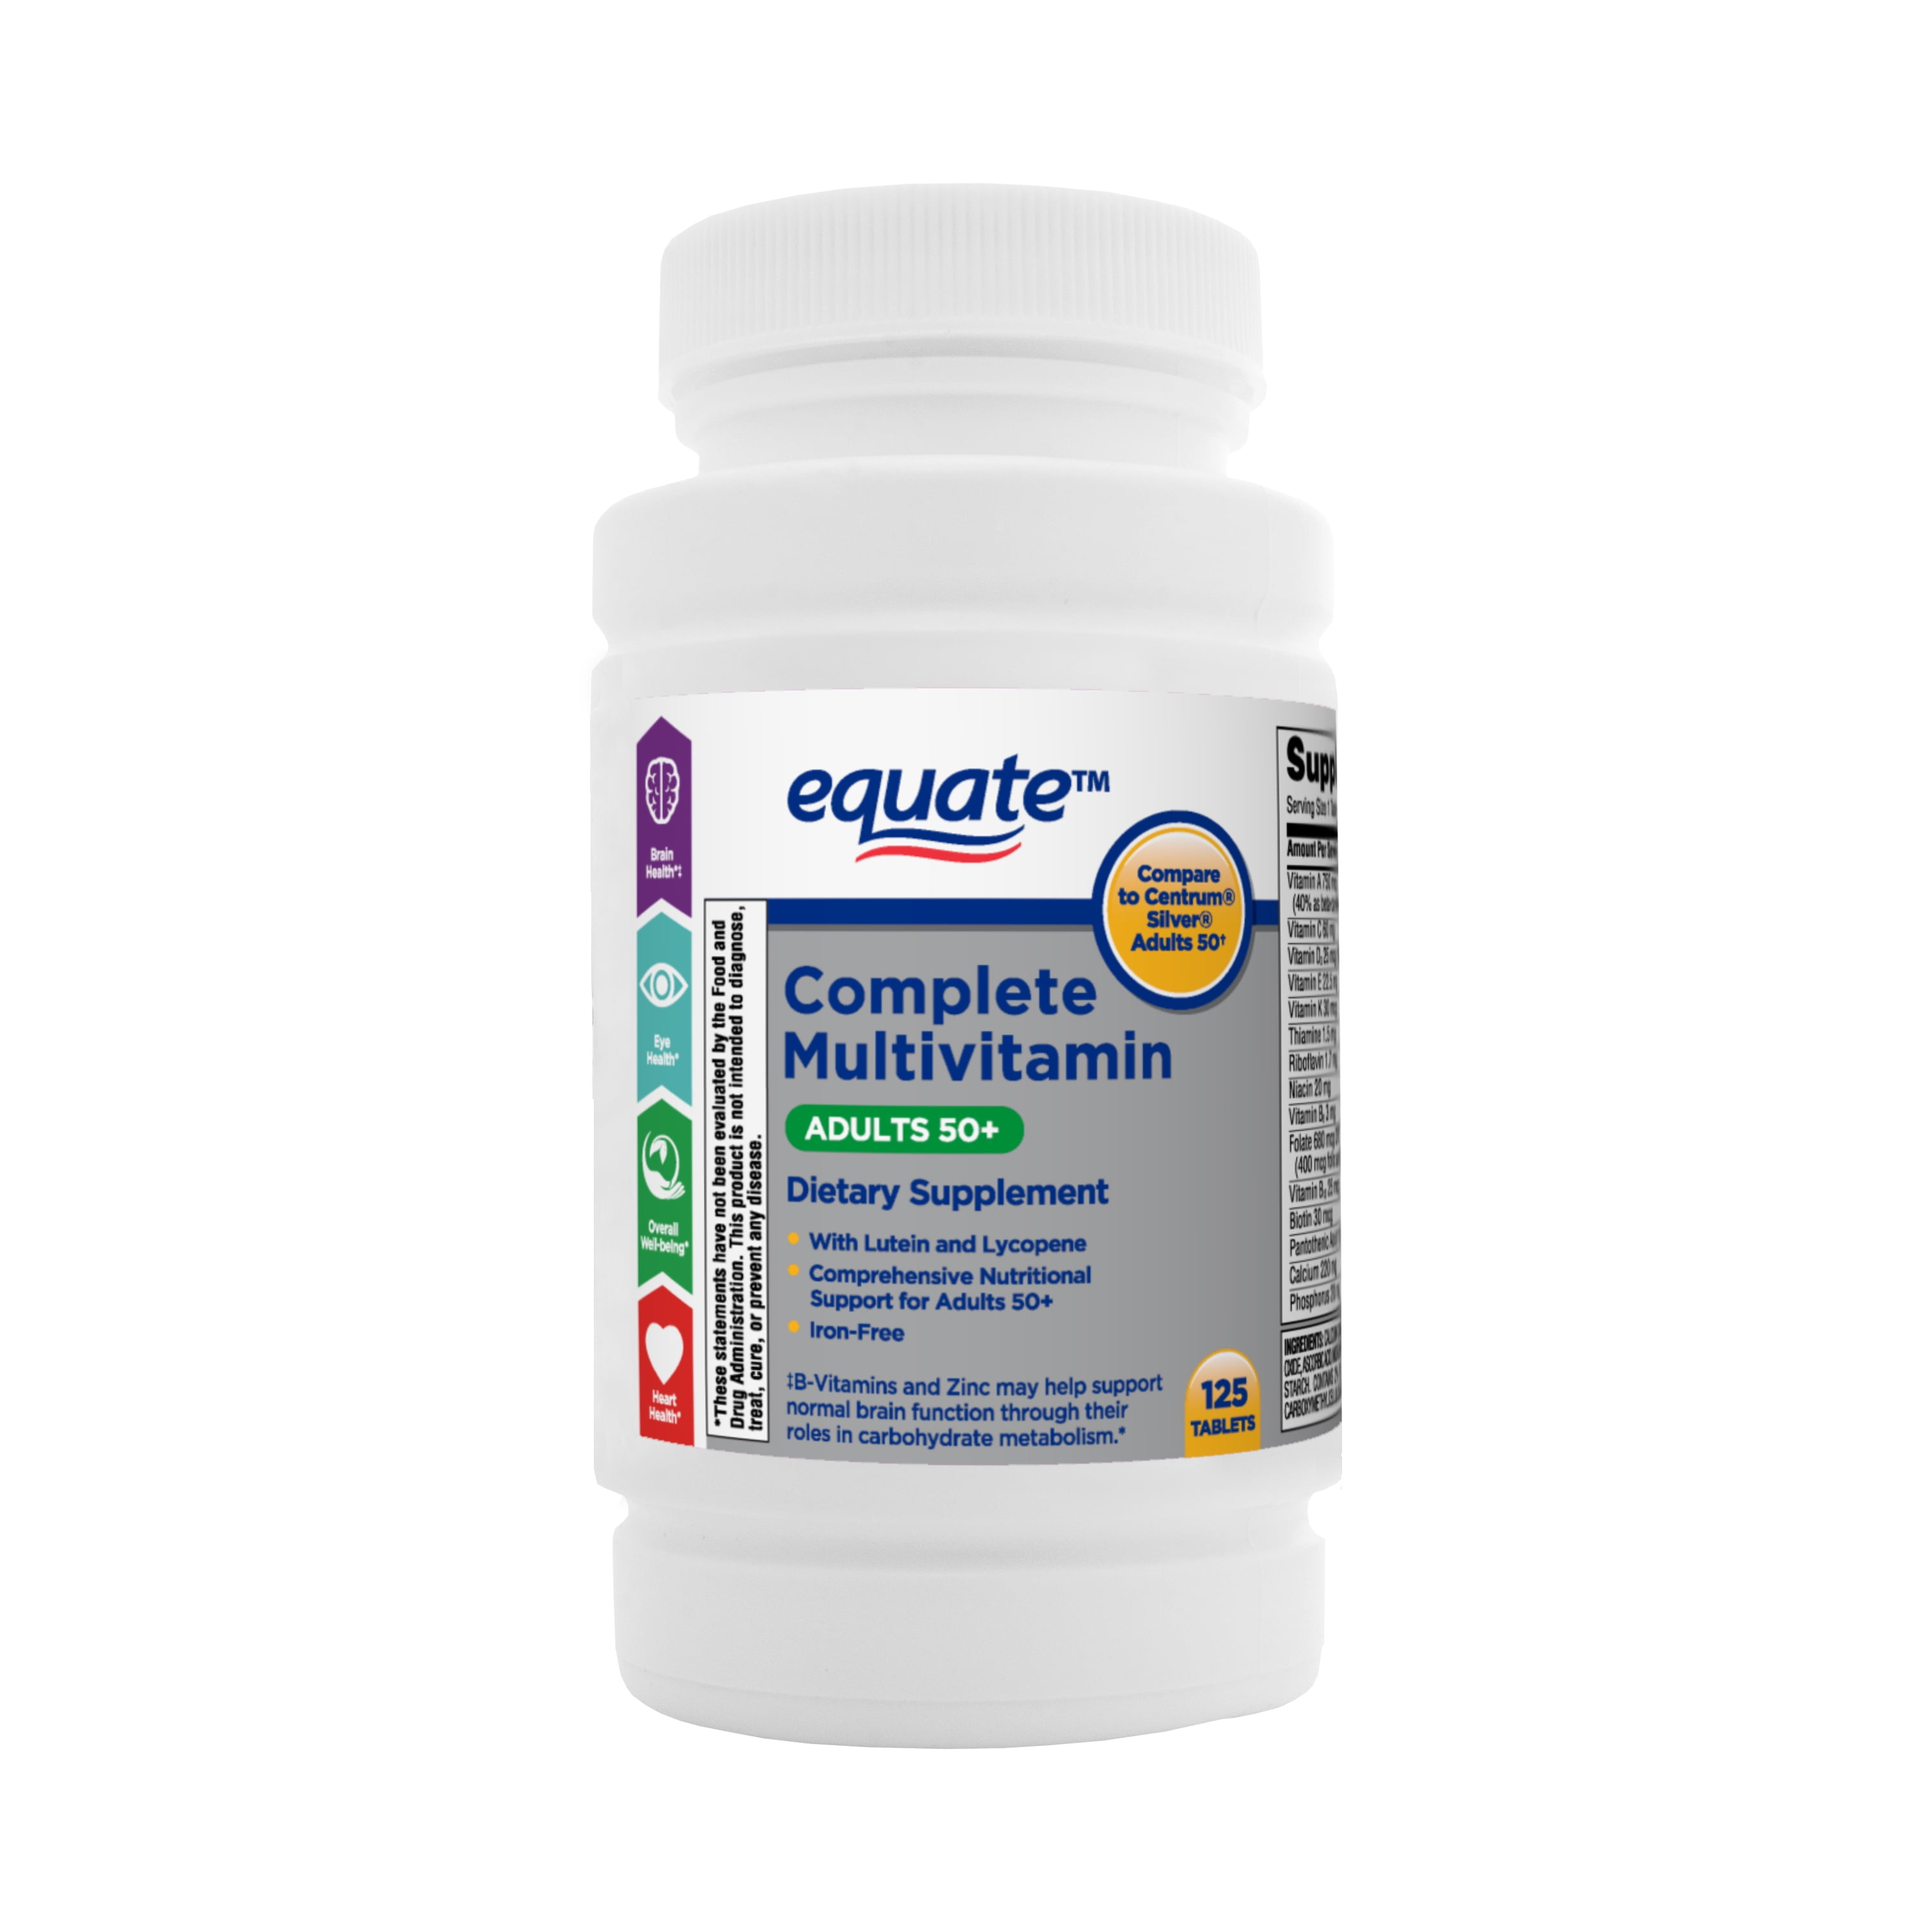 Equate Complete Multivitamin/Multimineral Supplement Tablets, Adults 50+, 125 Count